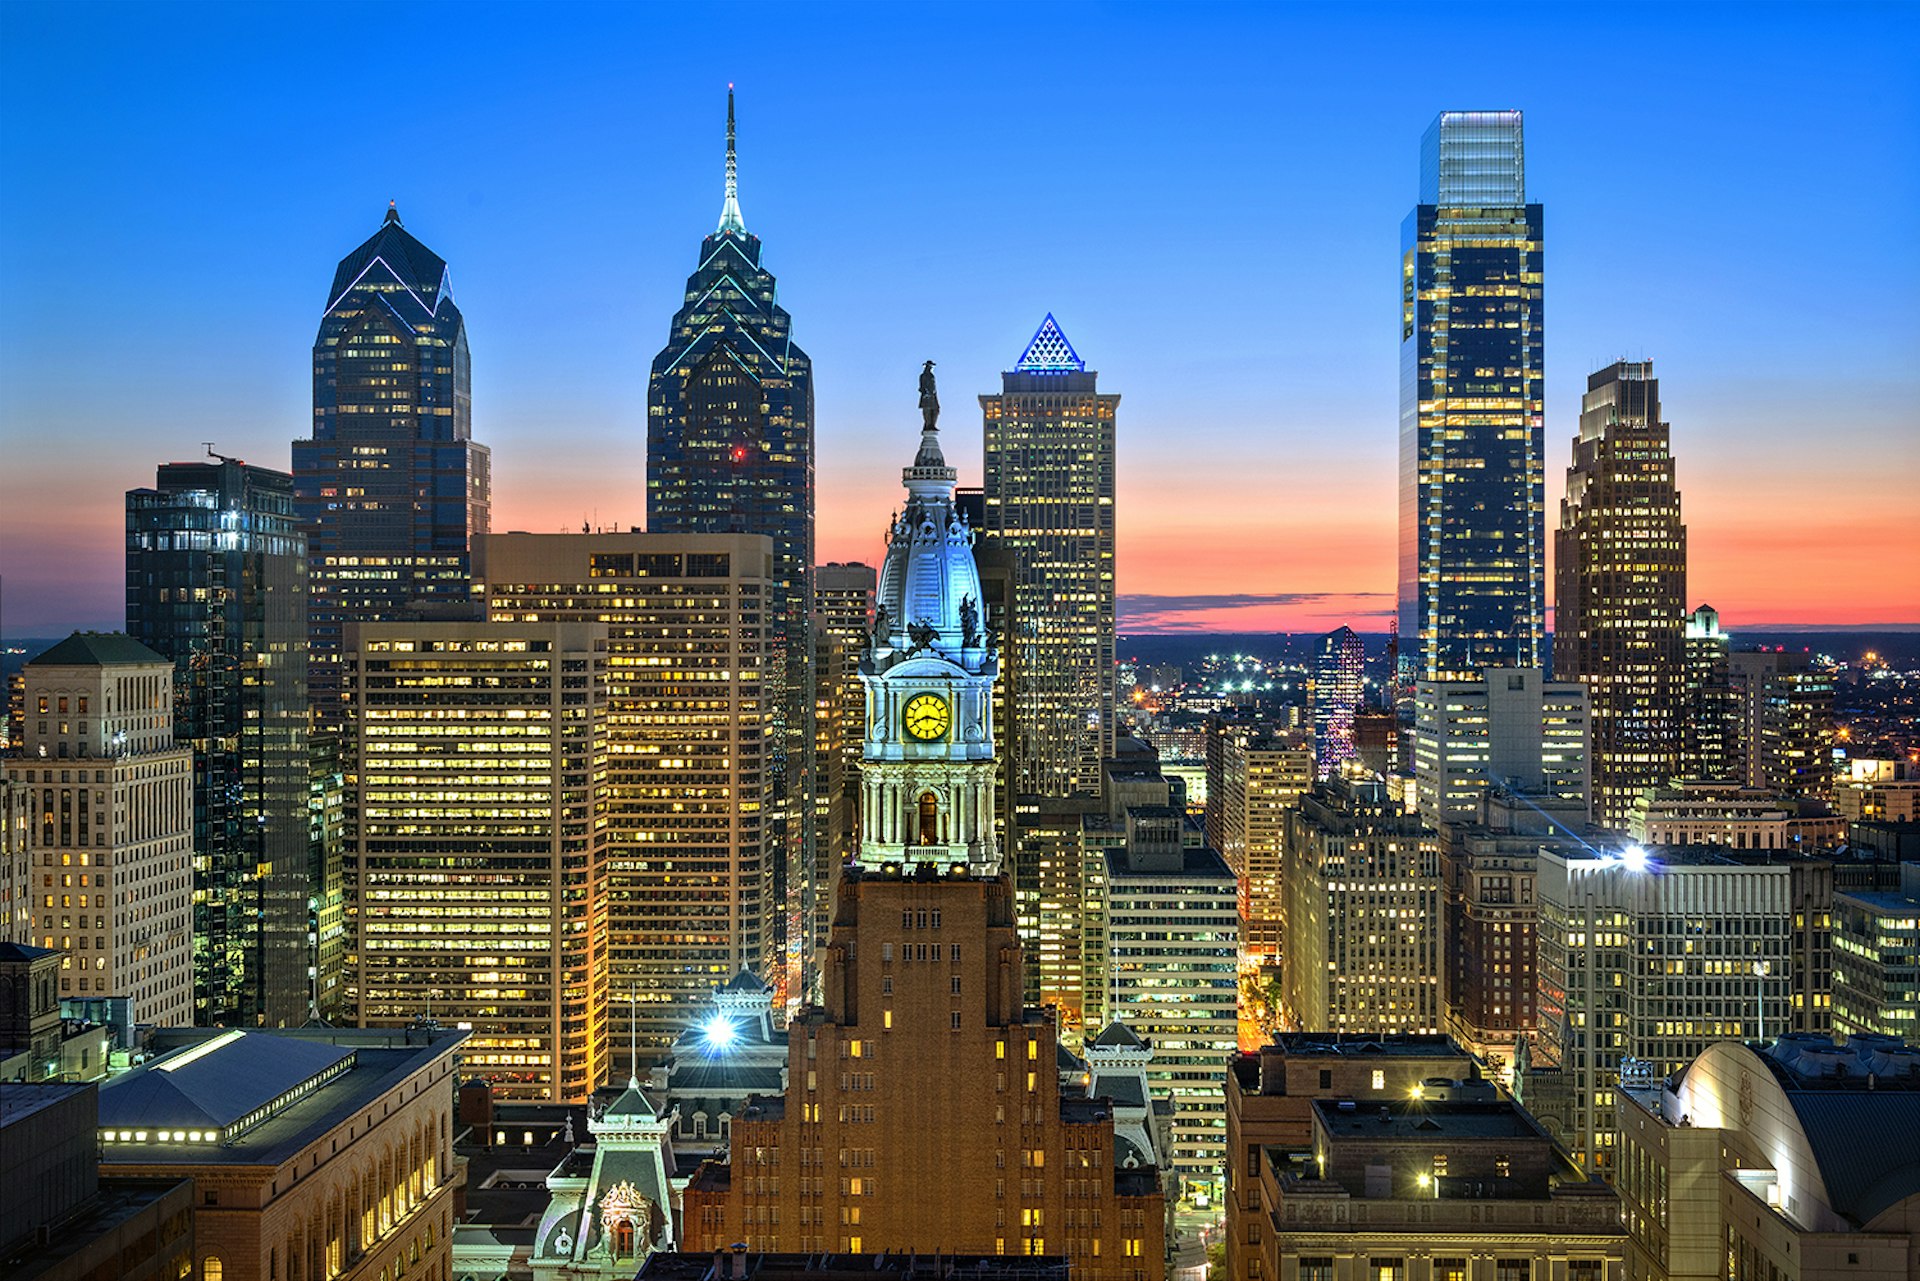 Philadelphia's skyline sparkles after dusk, from iconic City Hall to the tips of the sleek modern skyscrapers. Image courtesy of R. Kennedy / VISIT PHILADELPHIA